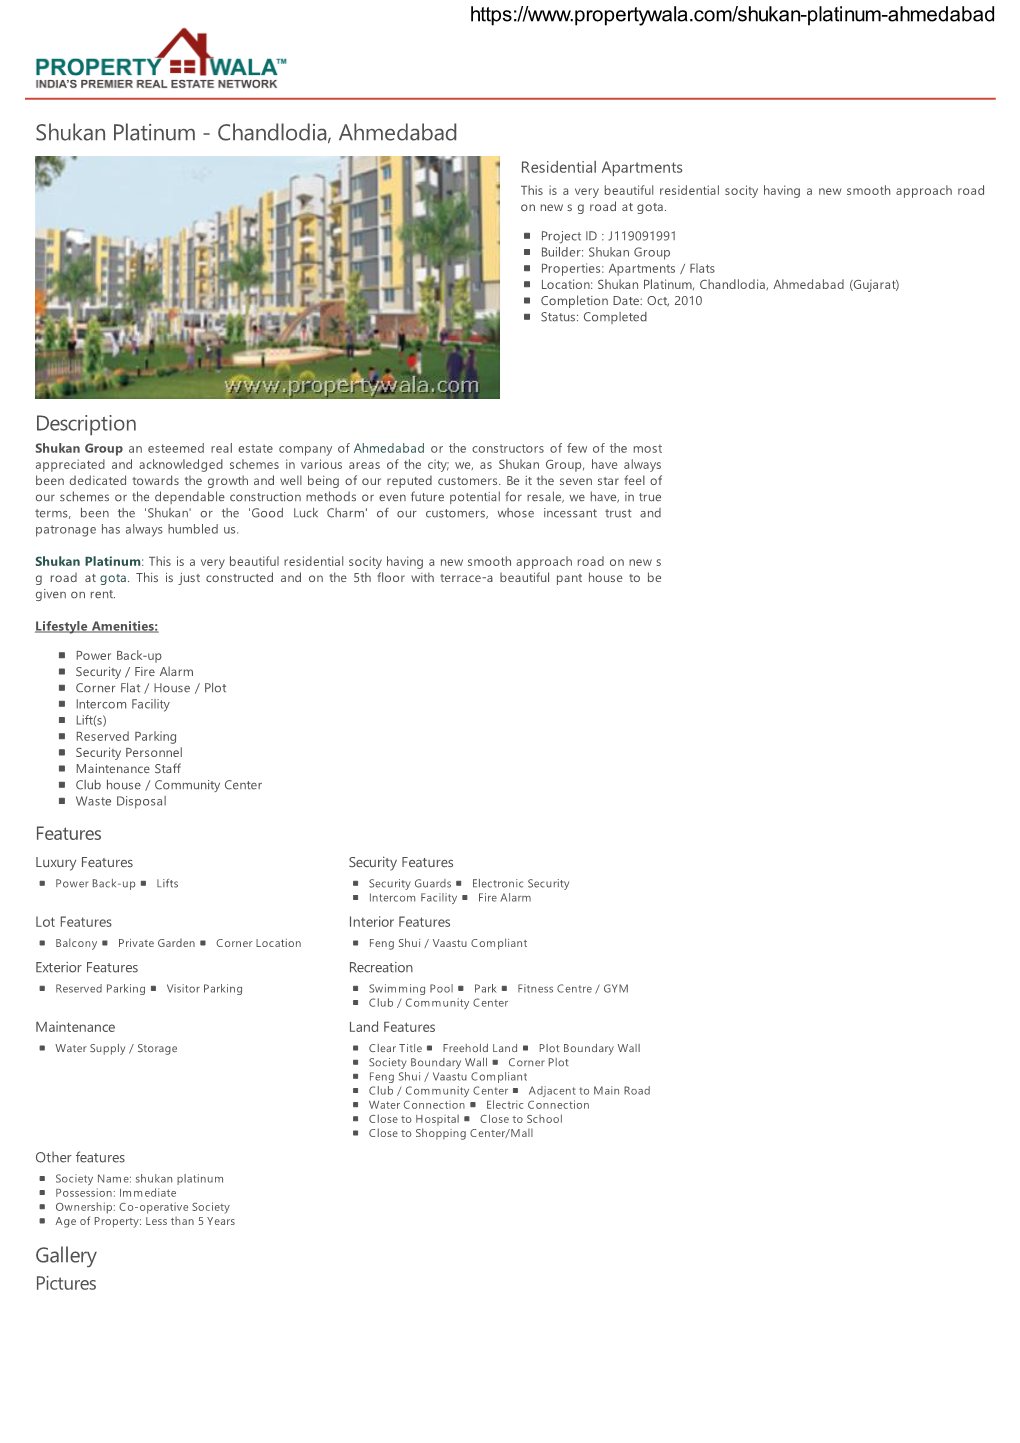 Shukan Platinum - Chandlodia, Ahmedabad Residential Apartments This Is a Very Beautiful Residential Socity Having a New Smooth Approach Road on New S G Road at Gota